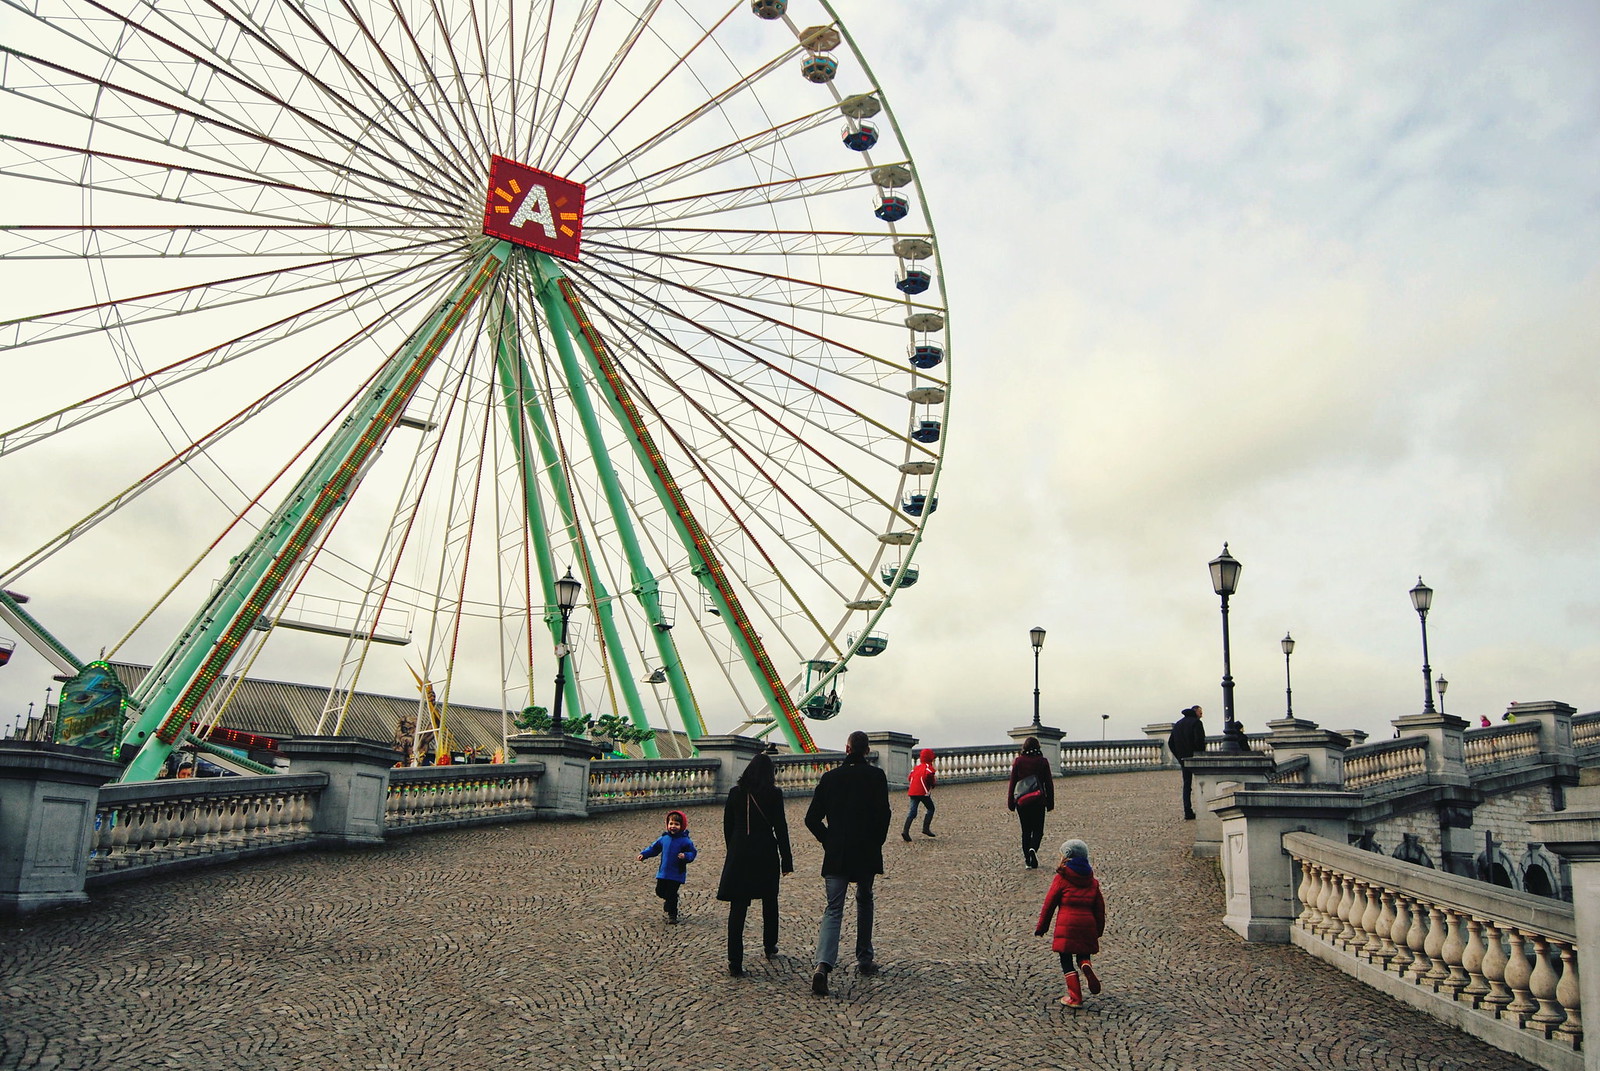 Things to do in Antwerp: ride the famous Ferris wheel.